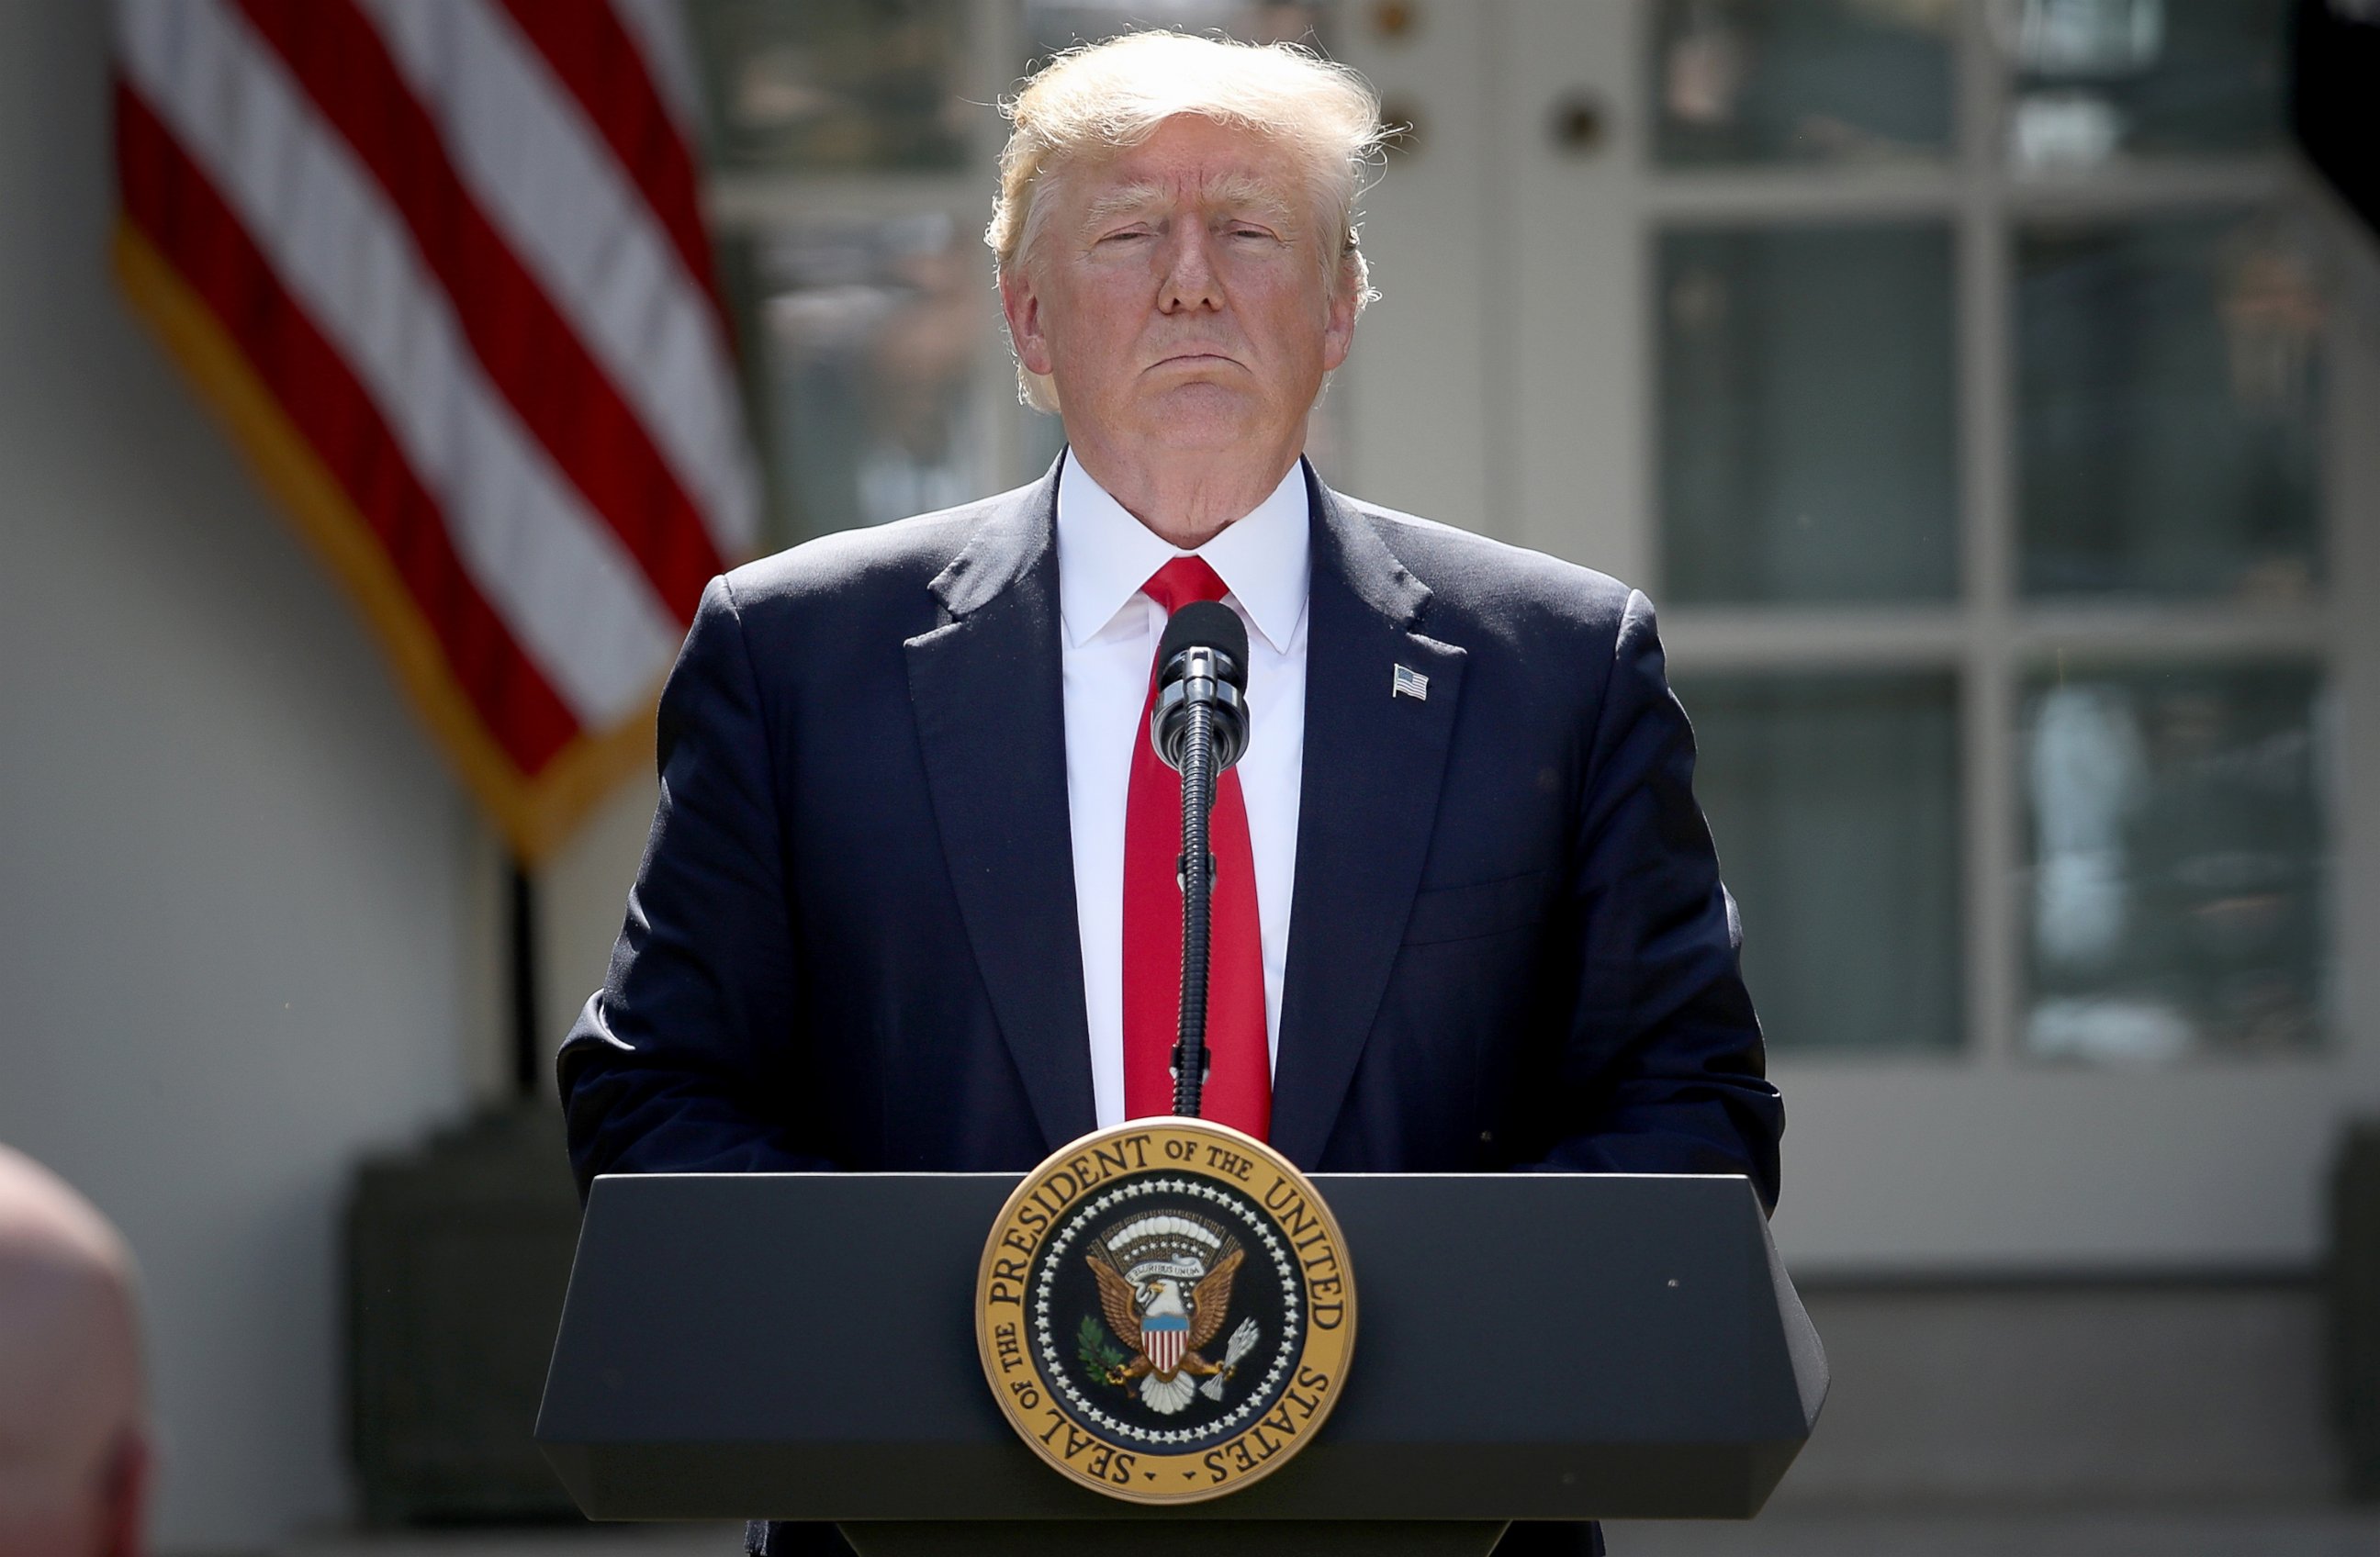 PHOTO: President Donald Trump concludes his announcement to withdraw the United States from the Paris Climate Agreement in the Rose Garden at the White House, June 1, 2017.